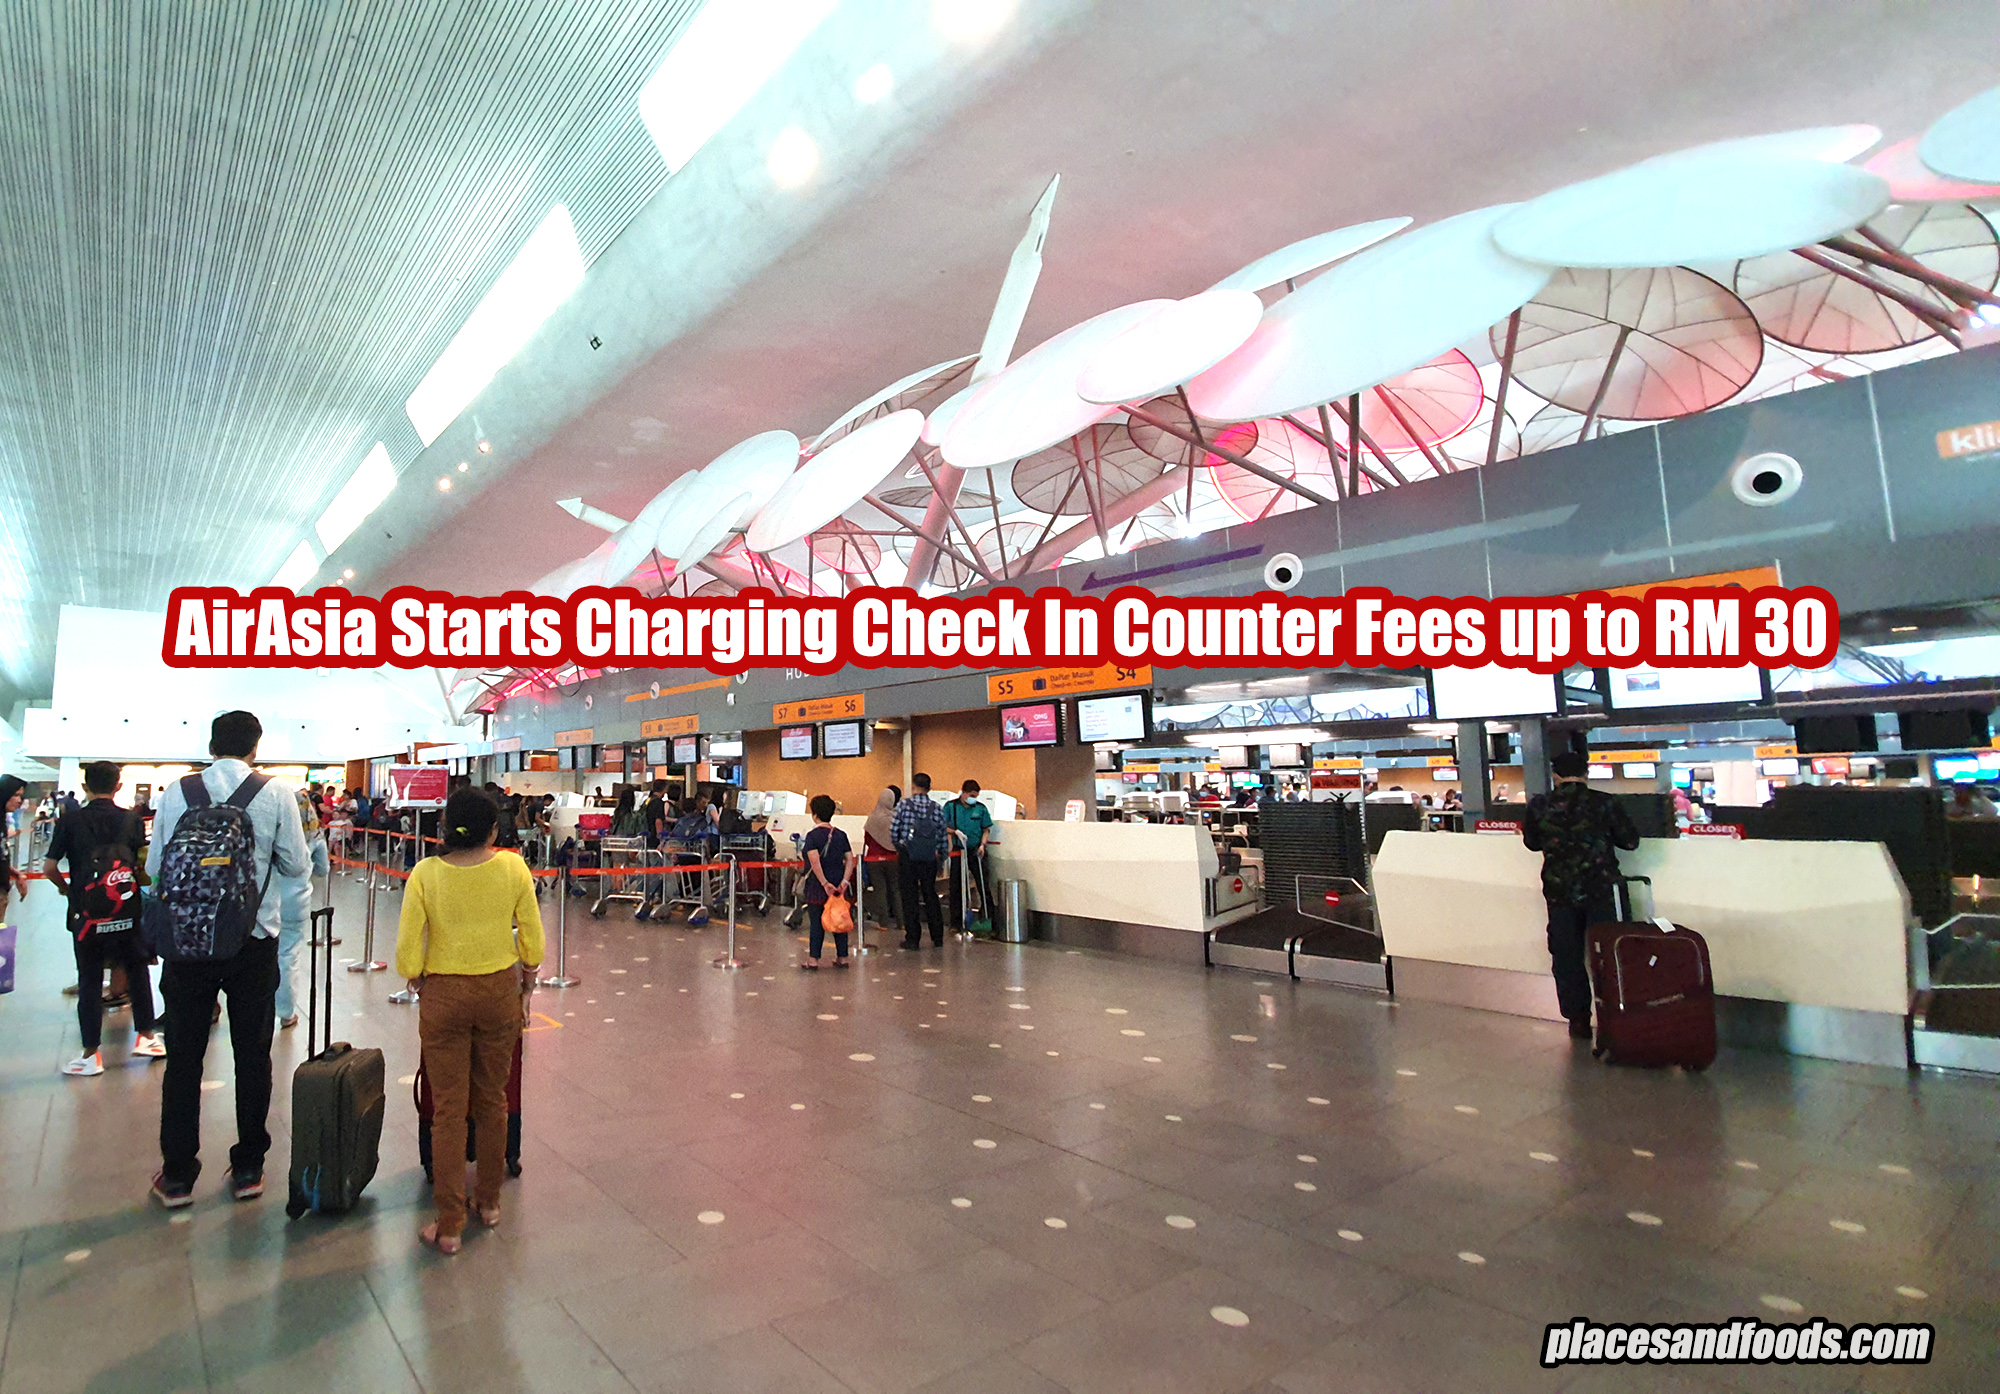 AirAsia Starts Charging Check In Counter Fees up to RM 30